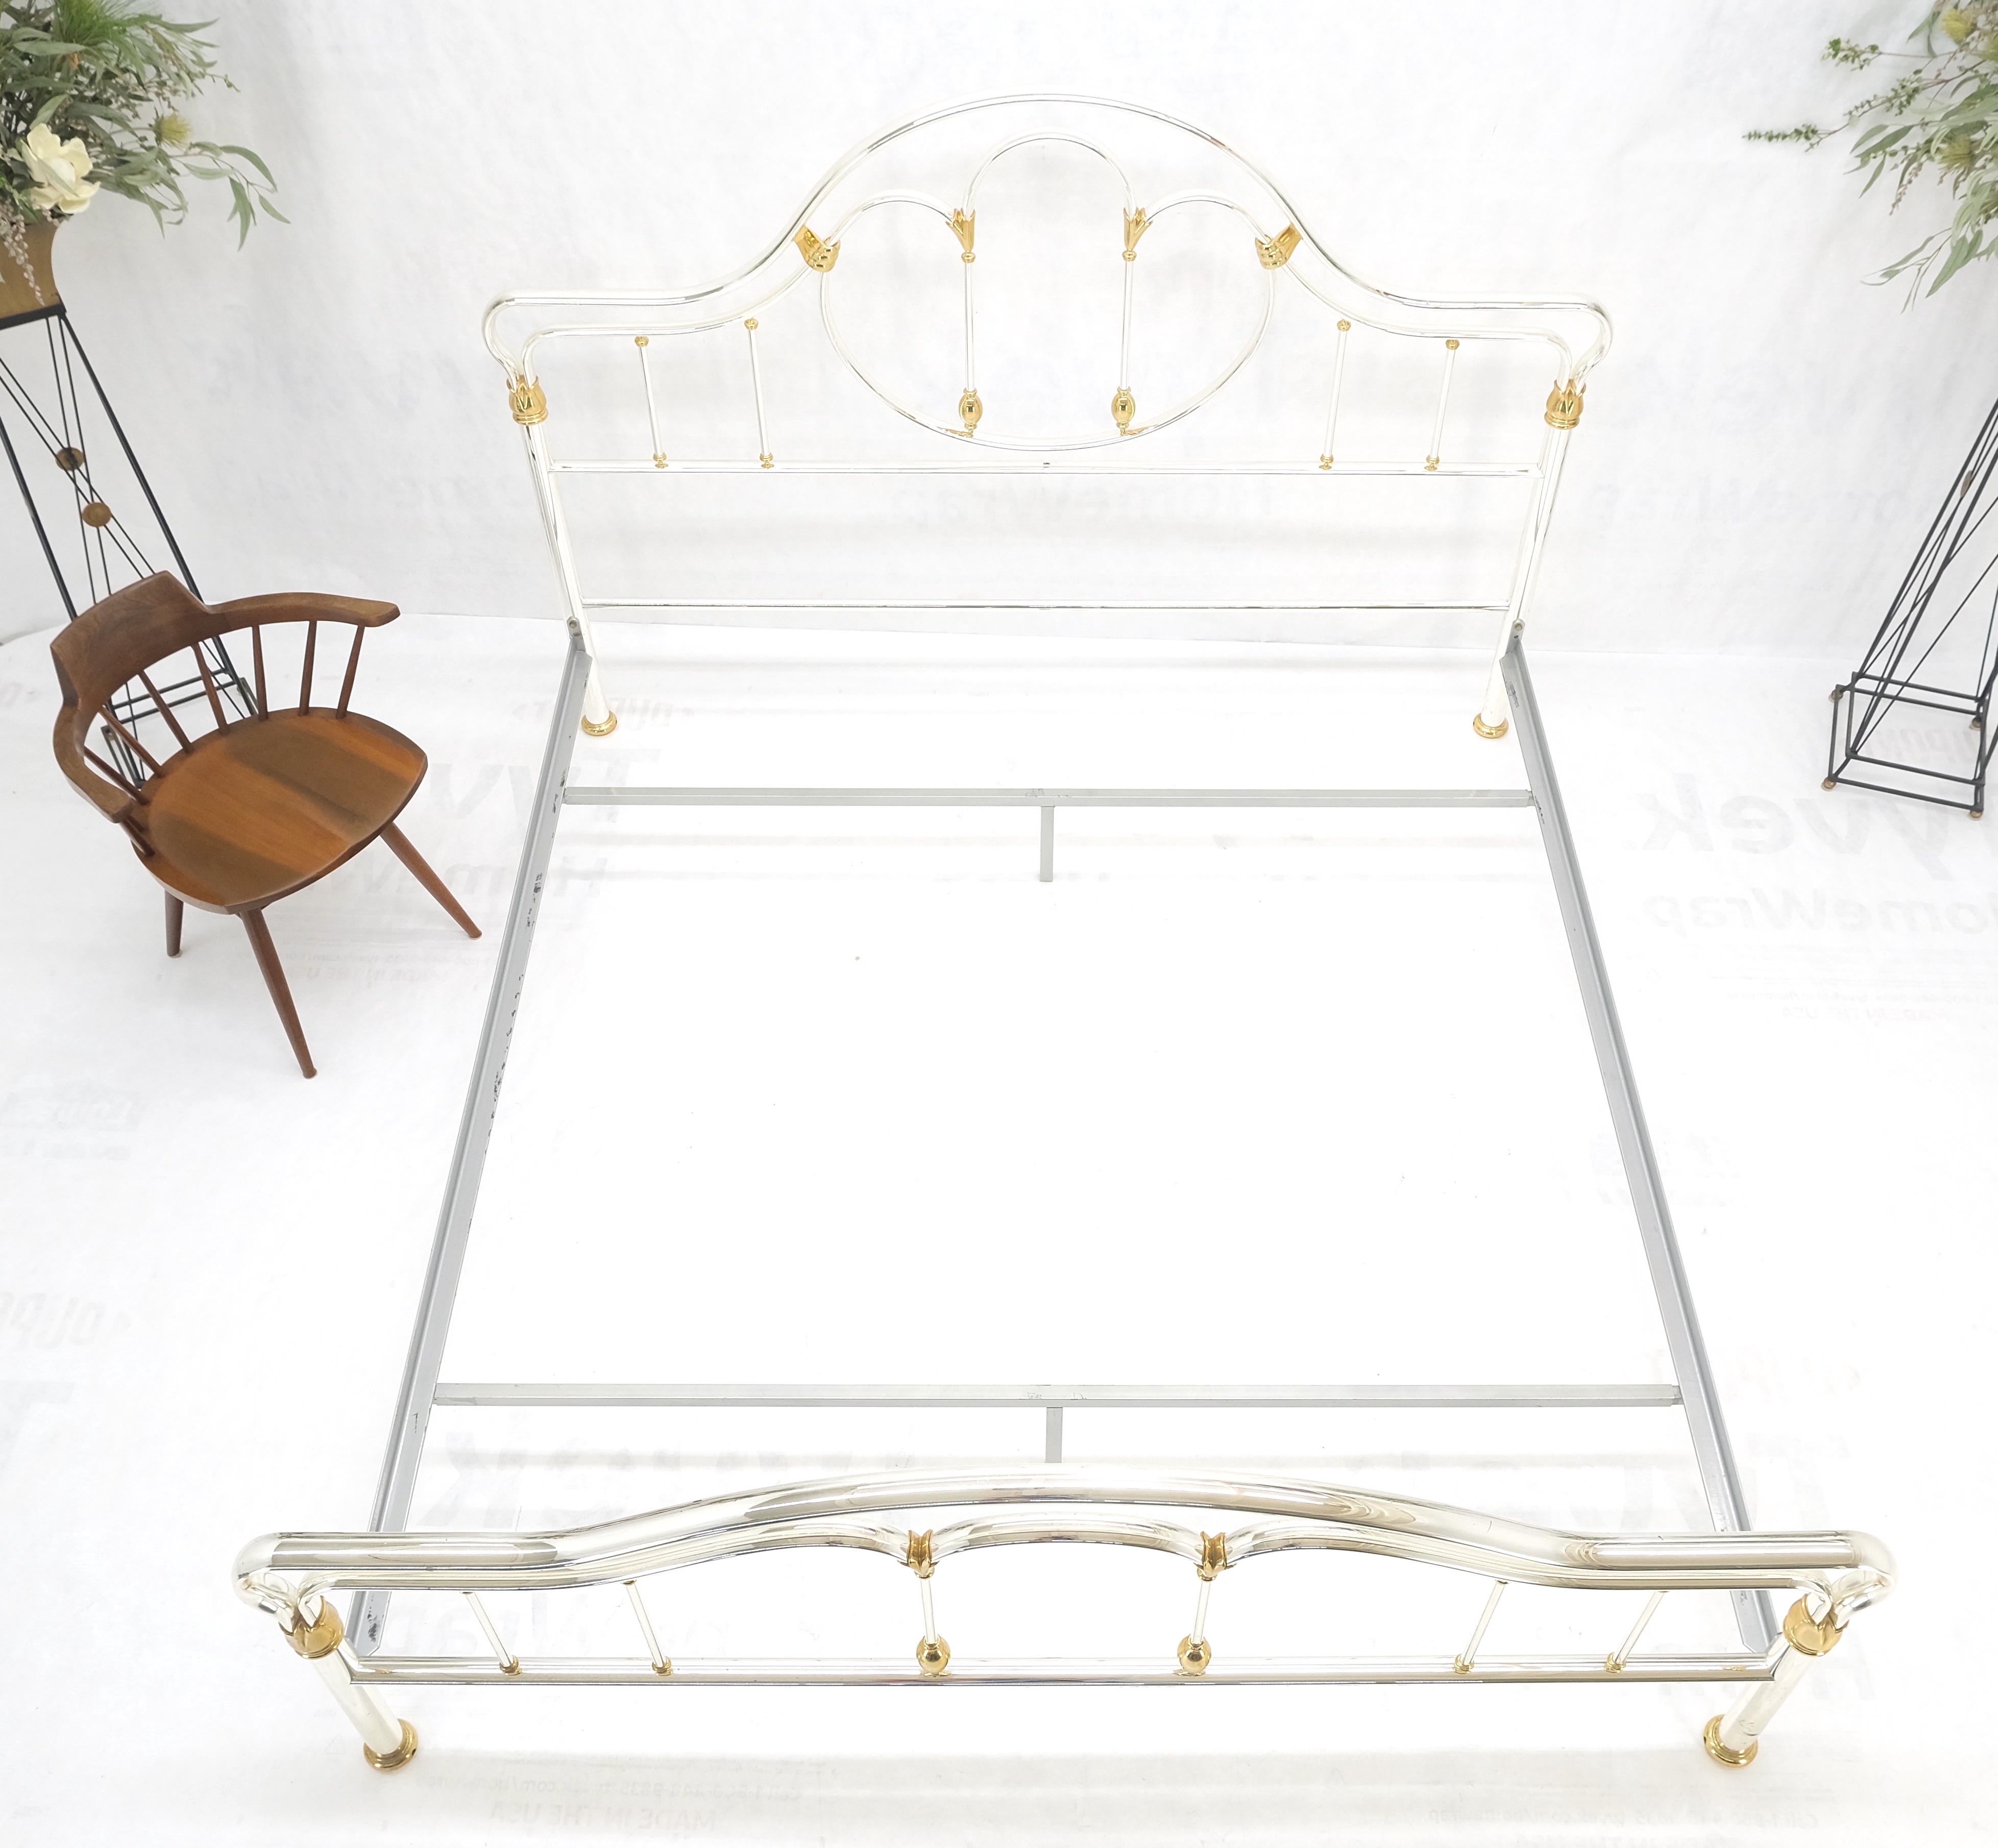 Brass & Silver Plated King Size Hollywood Regency Bed Frame Rails Mid Century In Good Condition For Sale In Rockaway, NJ